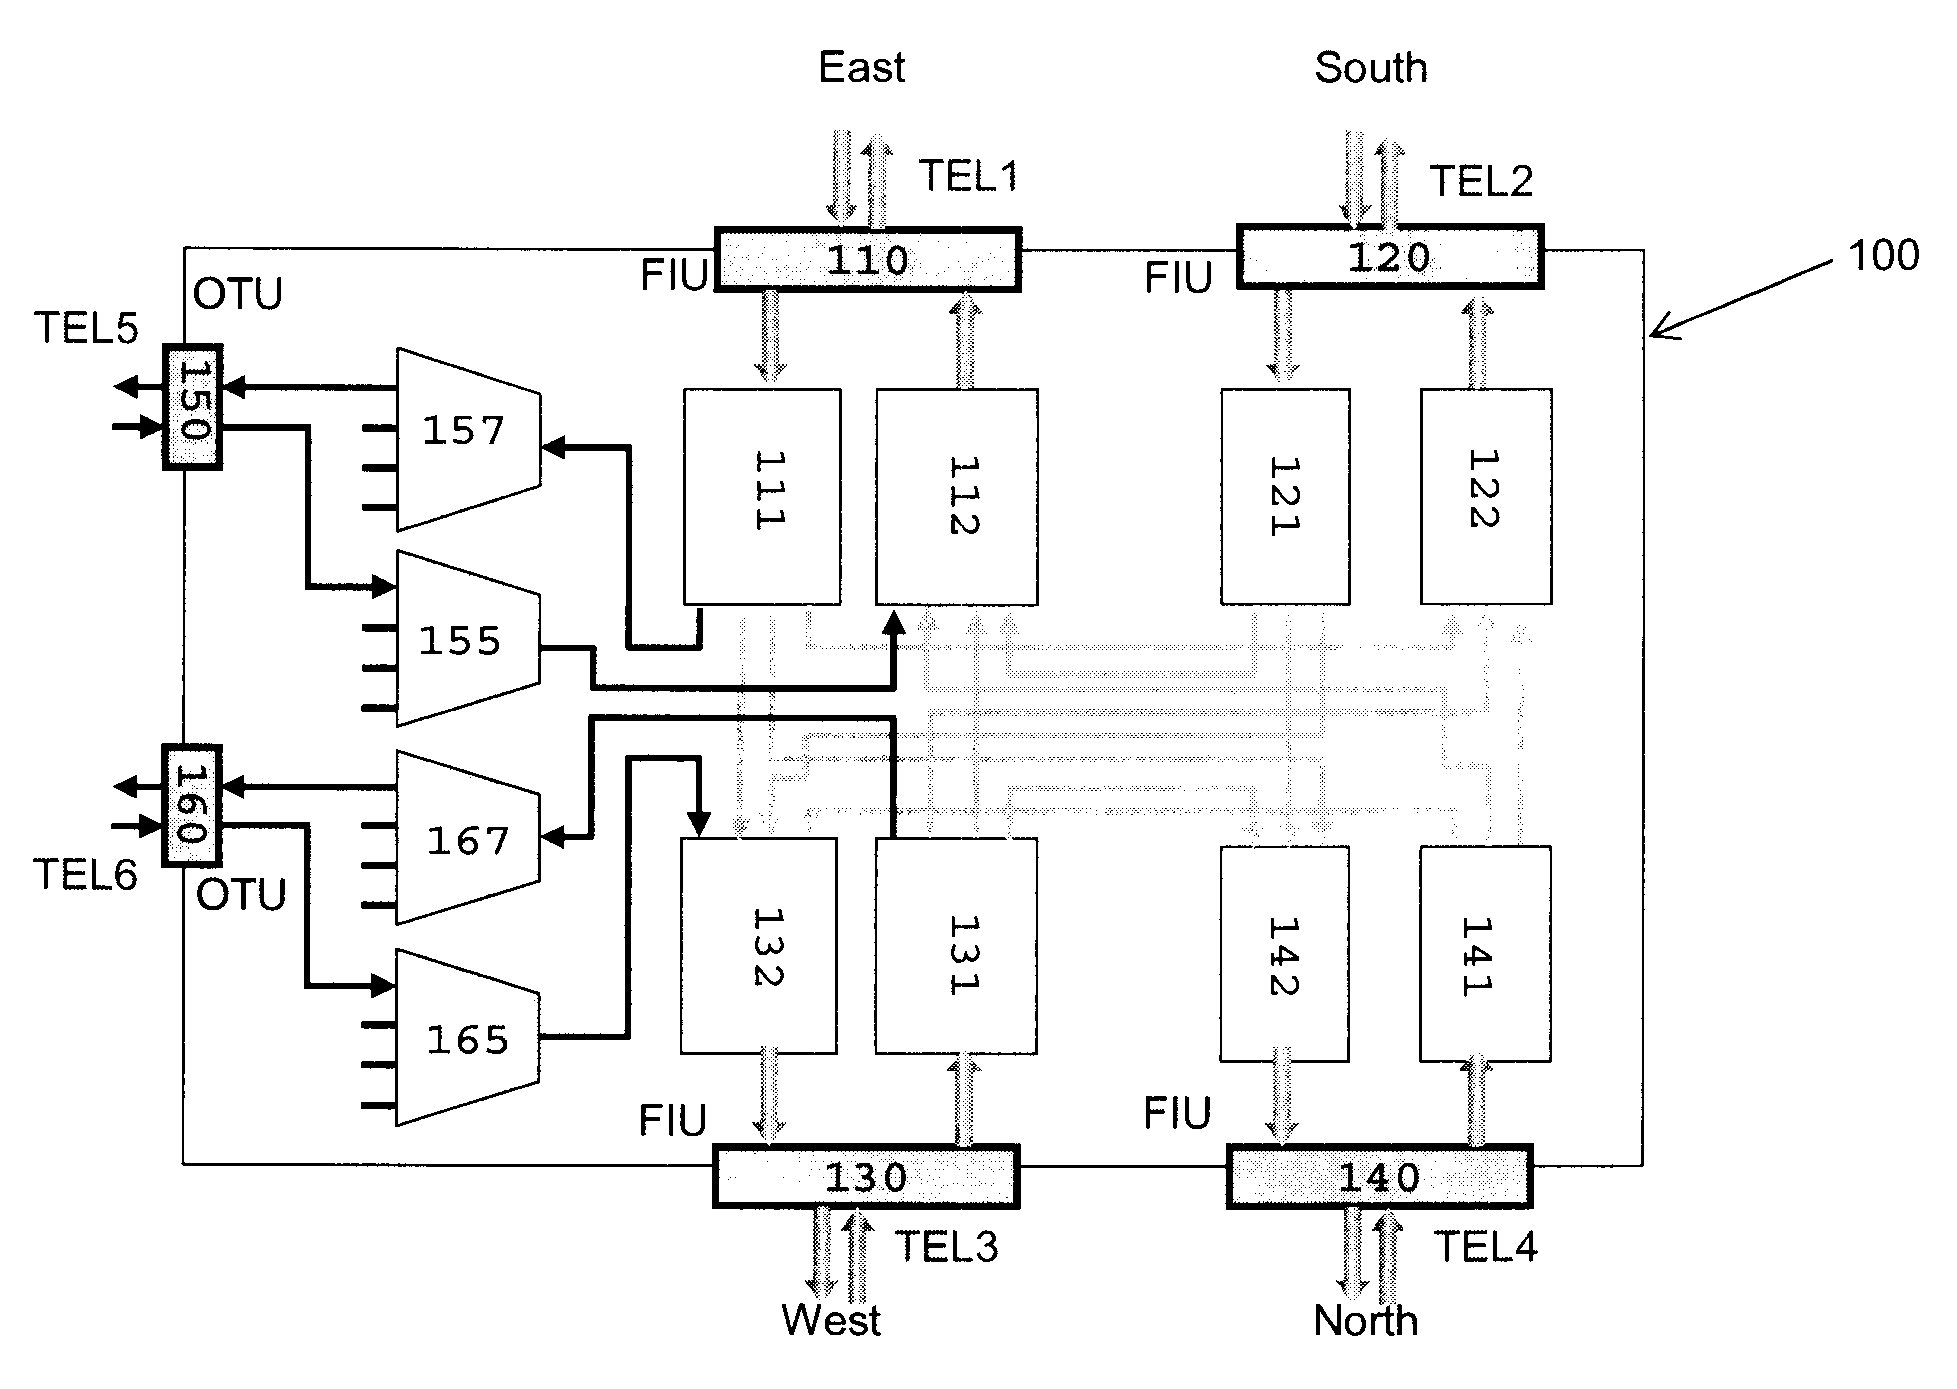 System for utilizing wavelength reachability and wavelength occupation status information to describe cross-connection capabilities in optical networks